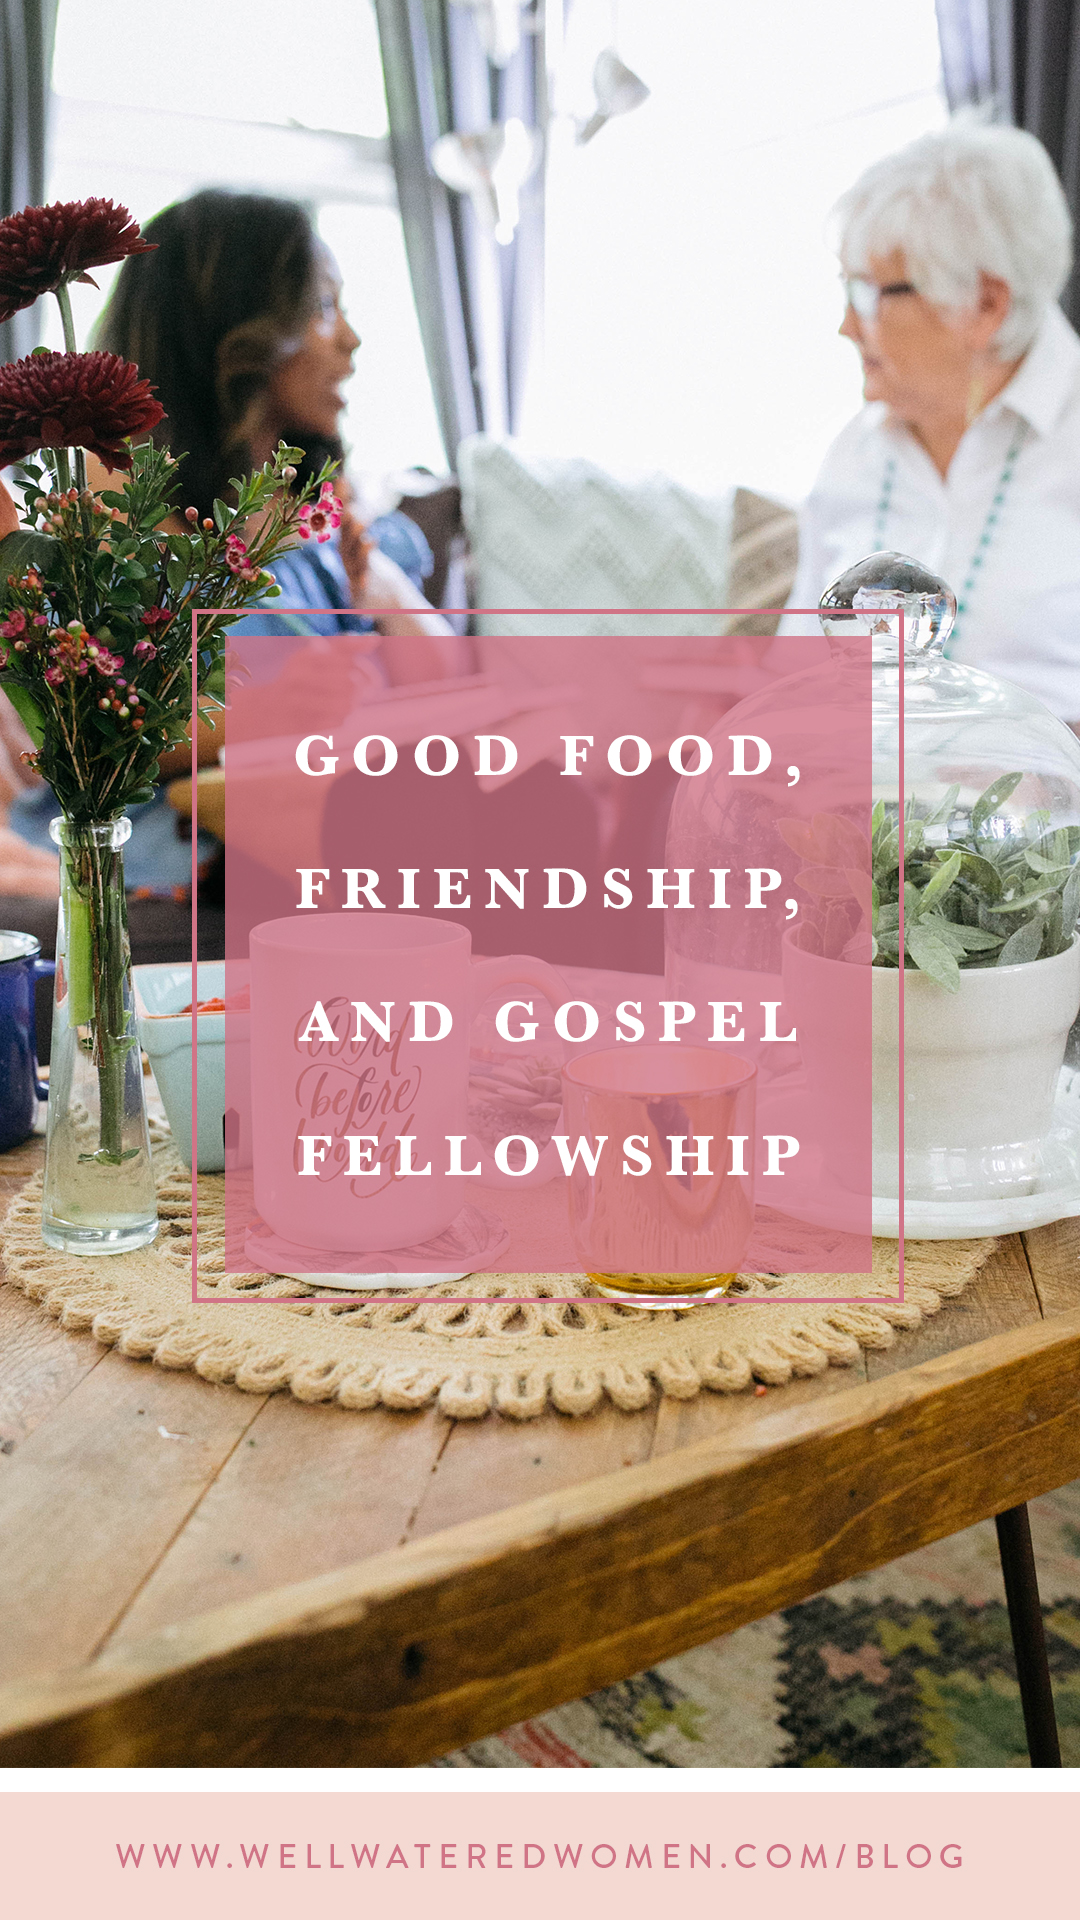 Good Food, Friendship, and Gospel Fellowship: Fellowship is so much more than potluck dinners and ice cream socials.